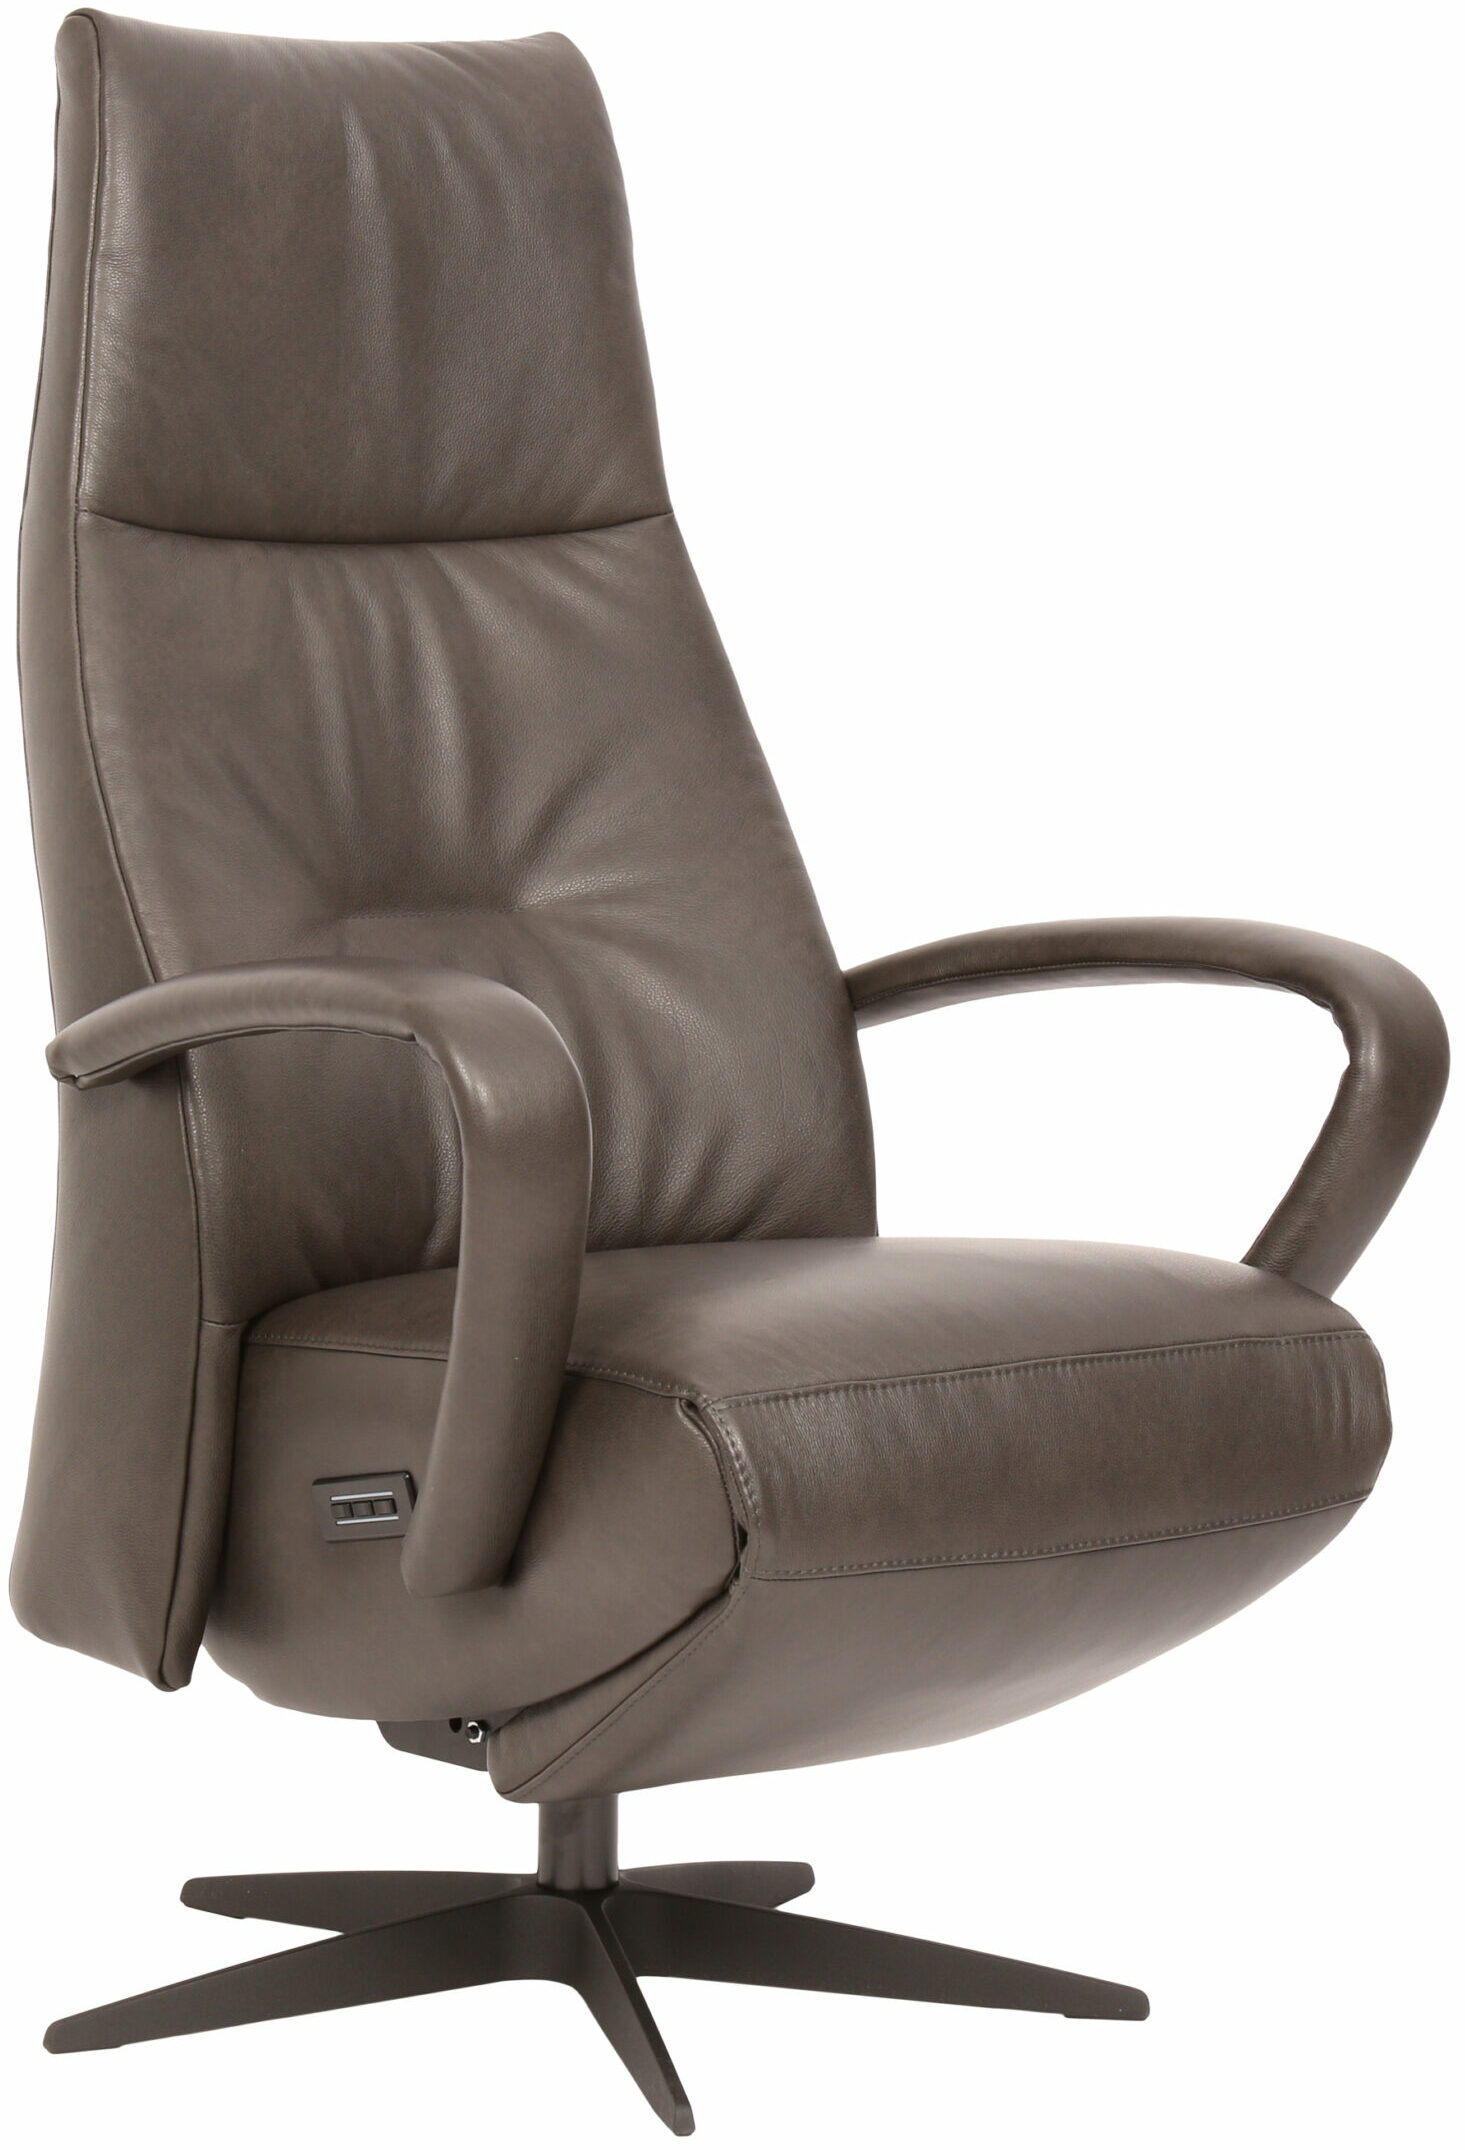 Twinz 627 relaxfauteuil